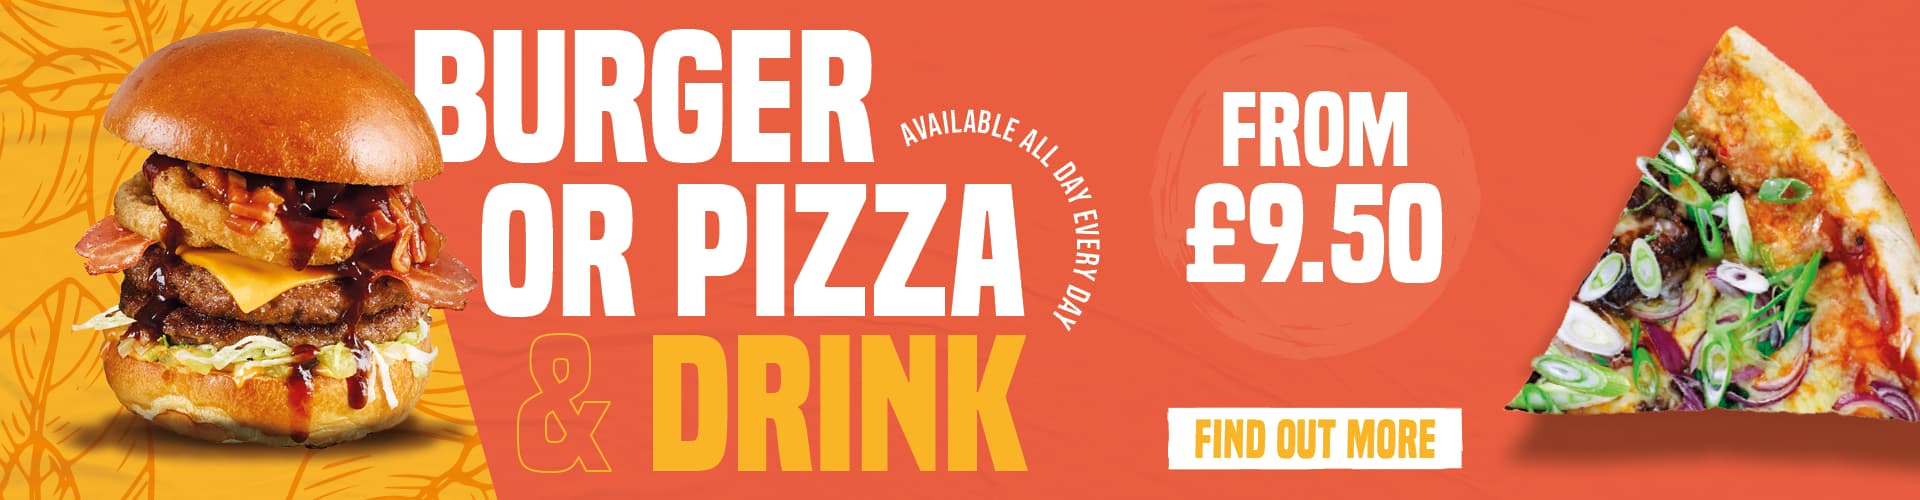 Burger or Pizza & Drink - Available All Day Every Day From £9.50. Find Out More!